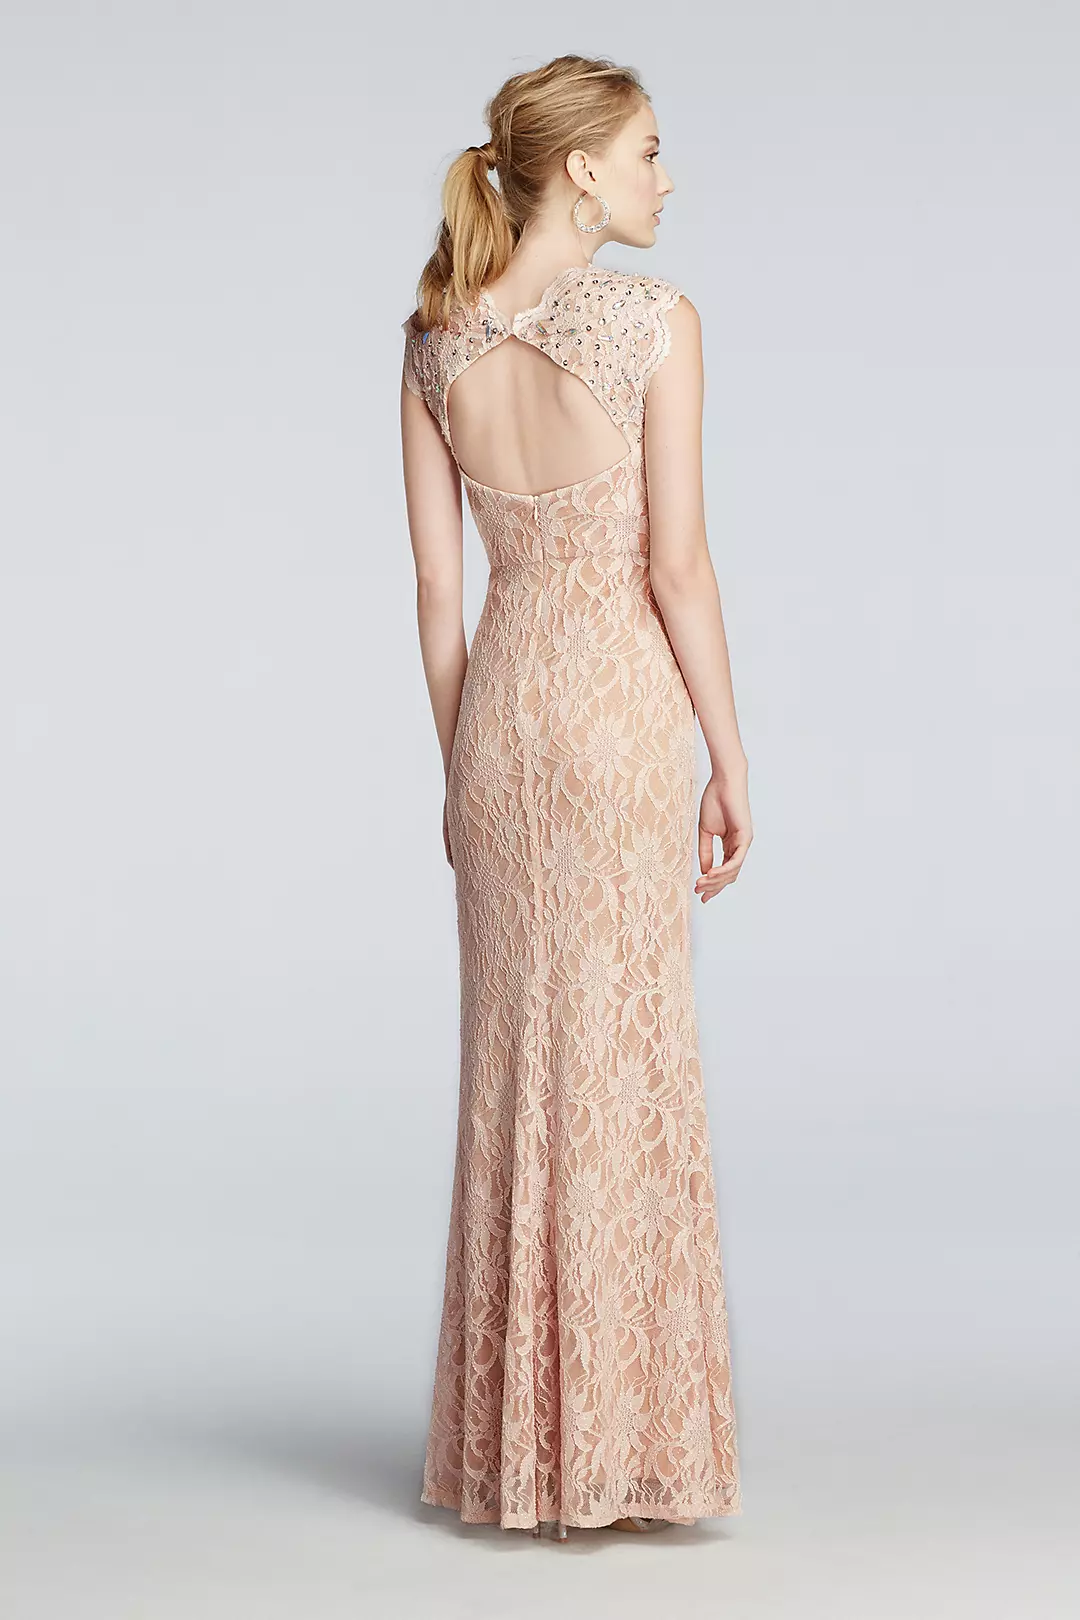 All Over Lace Prom Dress with Side Slit Skirt Image 2